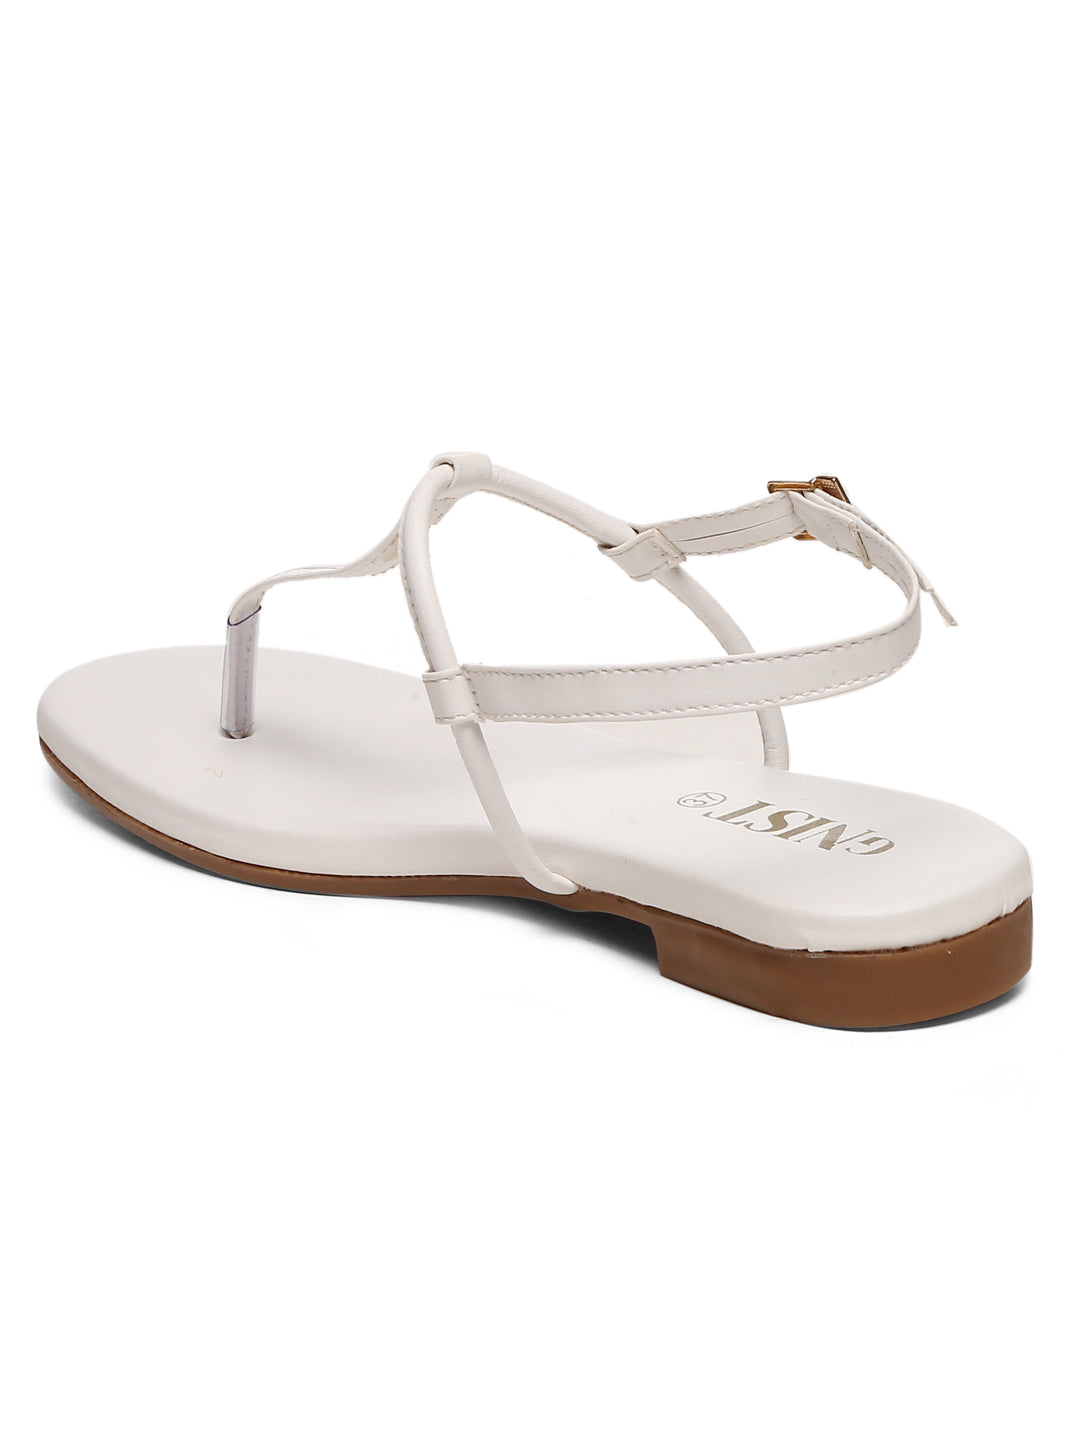 Women's Gucci Blondie thong sandal in white leather | GUCCI® US